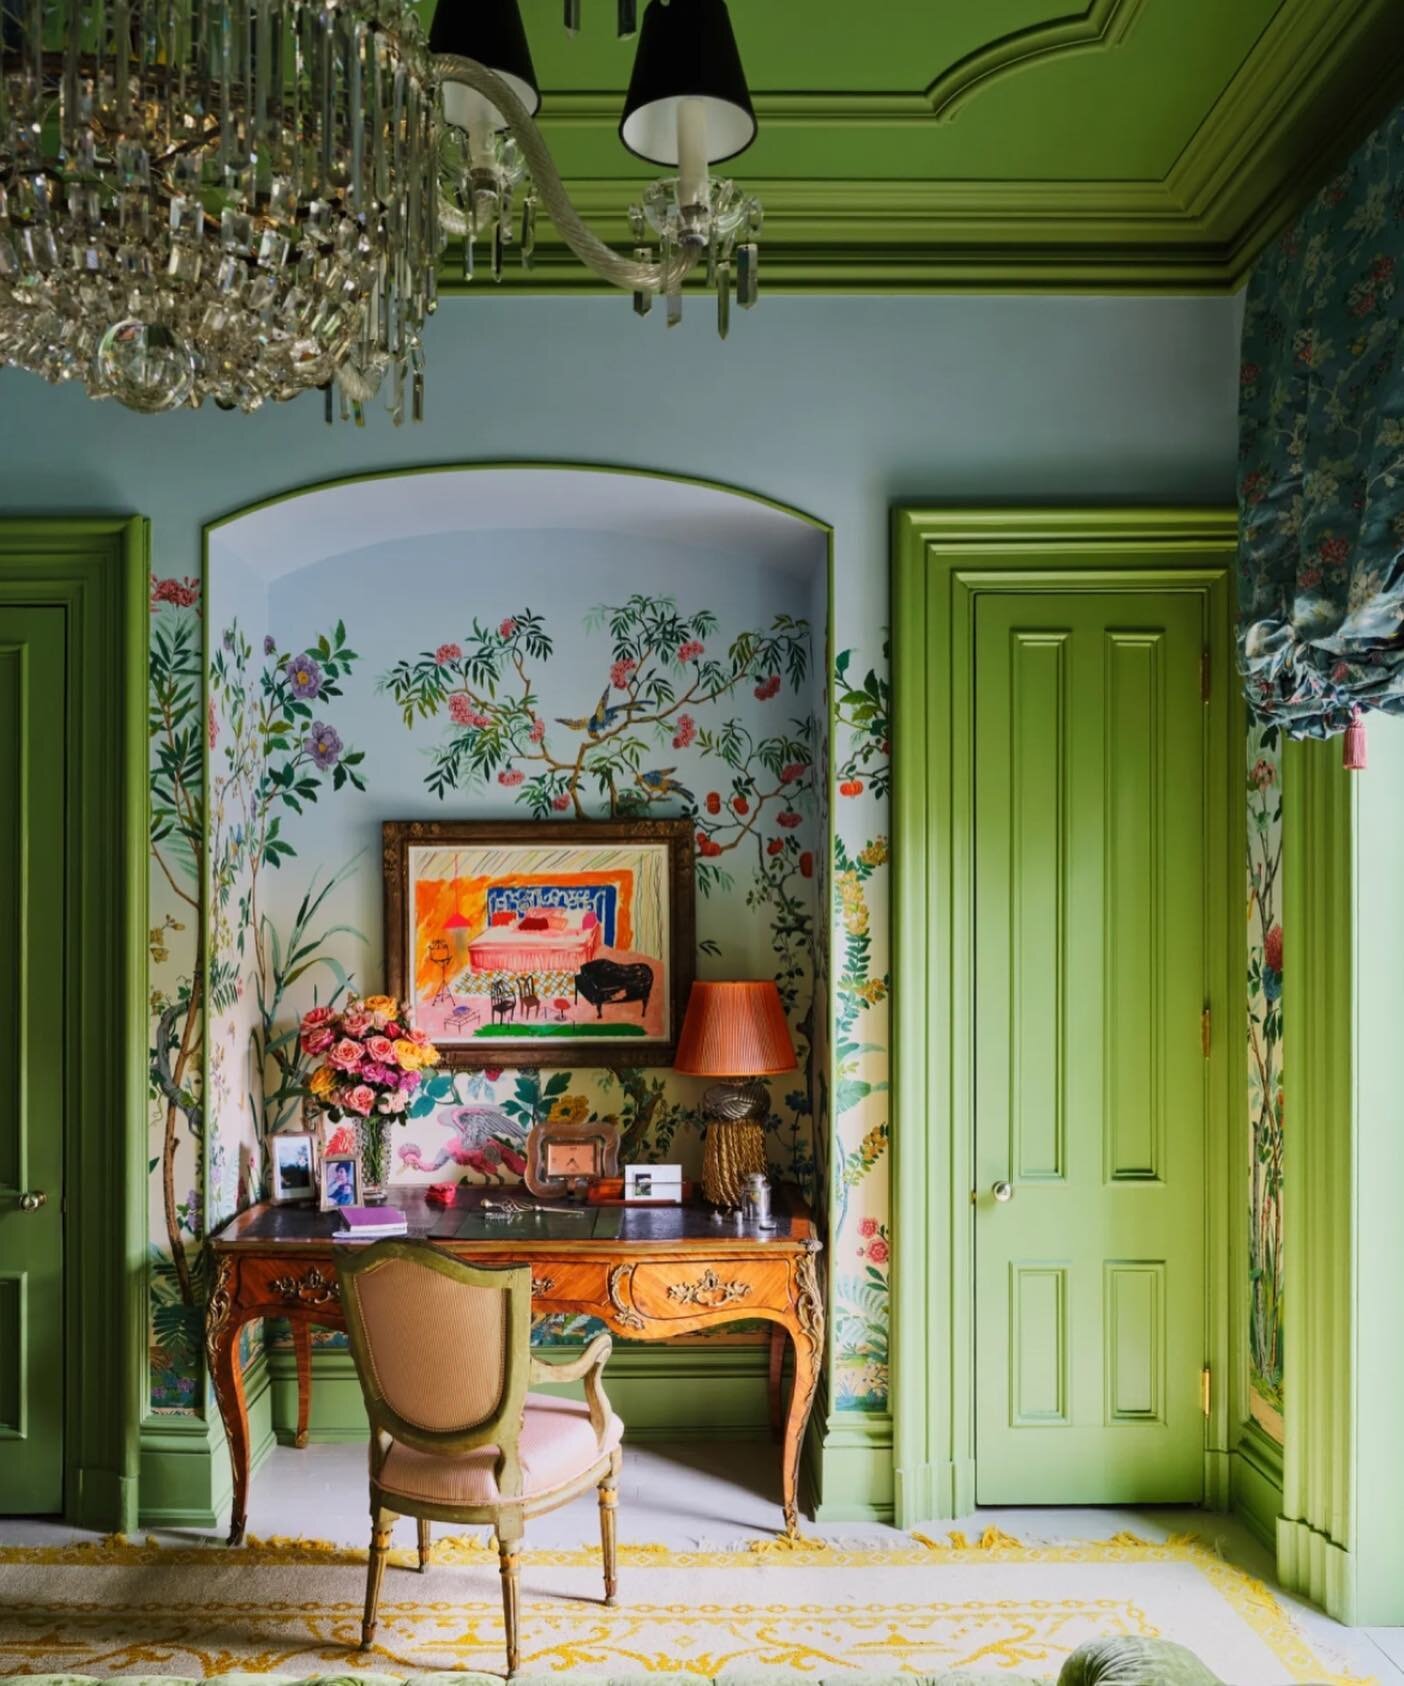 🌿Absolute sights in the @archdigest feature of @lilyallen and @dkharbour Brooklyn townhouse. 
We&rsquo;re taking inspo from their floral mural in our latest article up on the Sulis Studio. Read now! ✨LINK IN BIO✨

.
.
.
.
#interior #lilyallen #archi